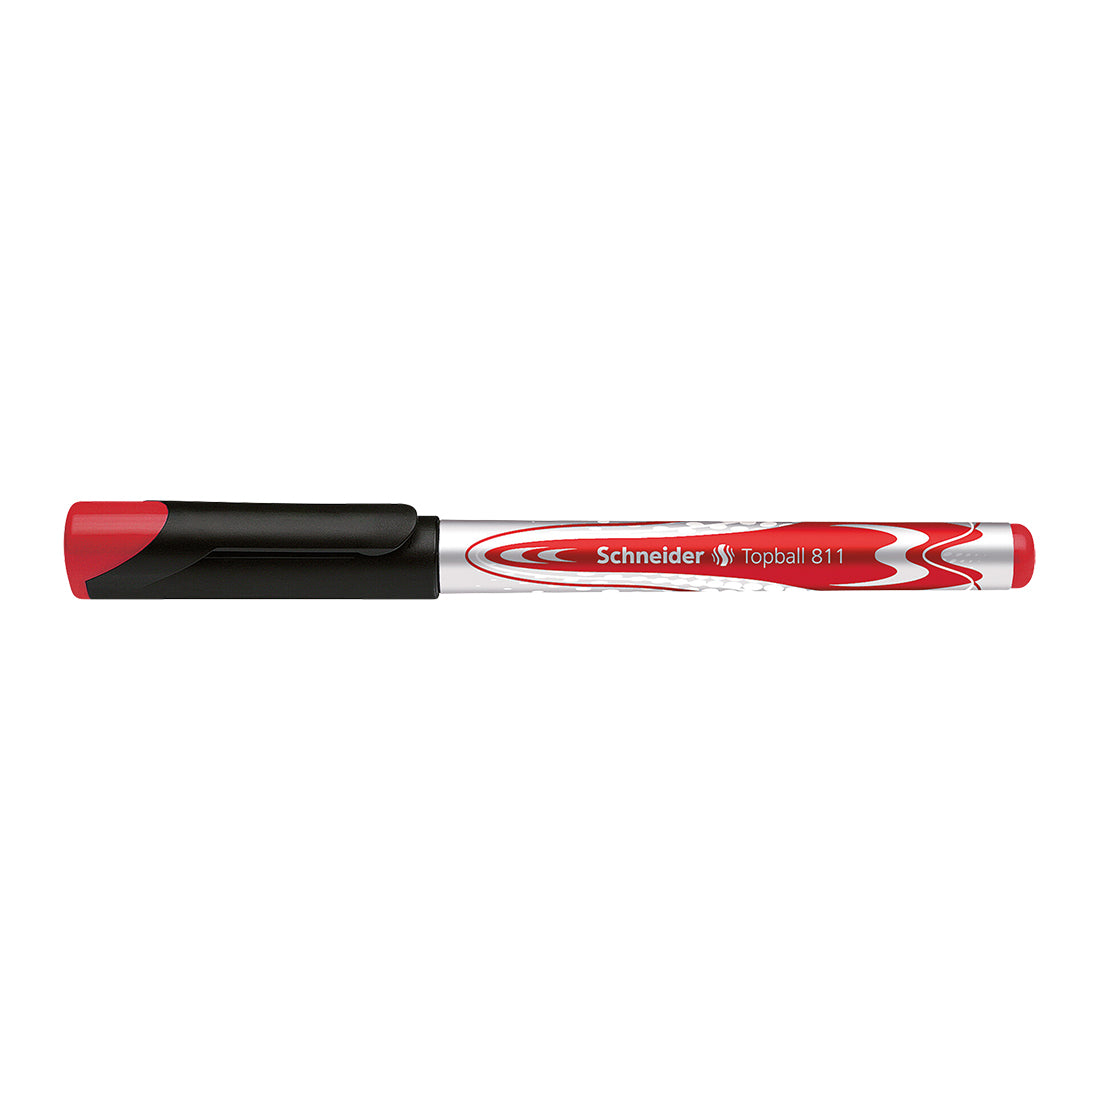 Topball 811 Rollerball 0.5mm, Box of 10#ink-colour_red